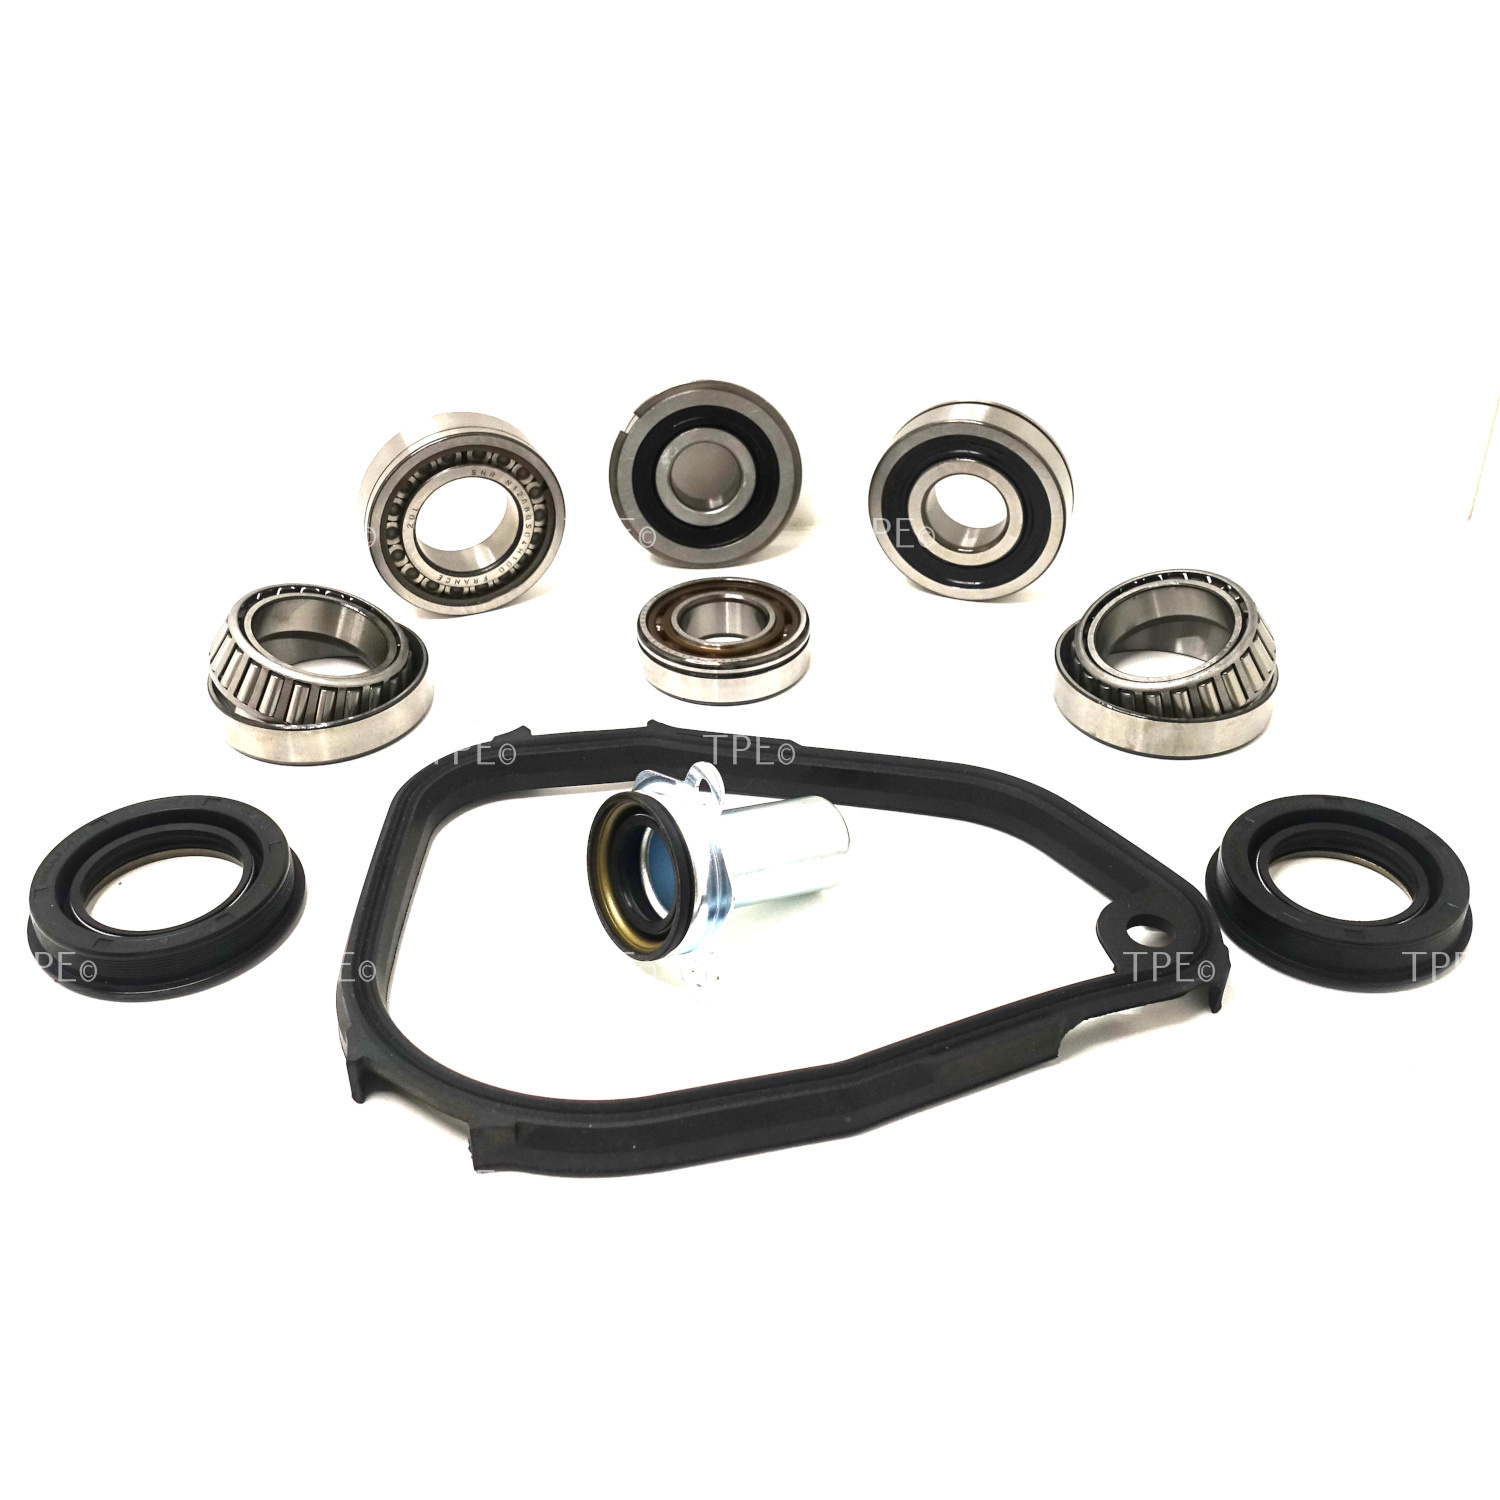 BMW.KB.01 This Bearing & Seal Kit contains the following Parts:

• 6 Bearings
• 1 Gasket
• 1 Input Shaft Nose Cone
• 2 Differential Seals